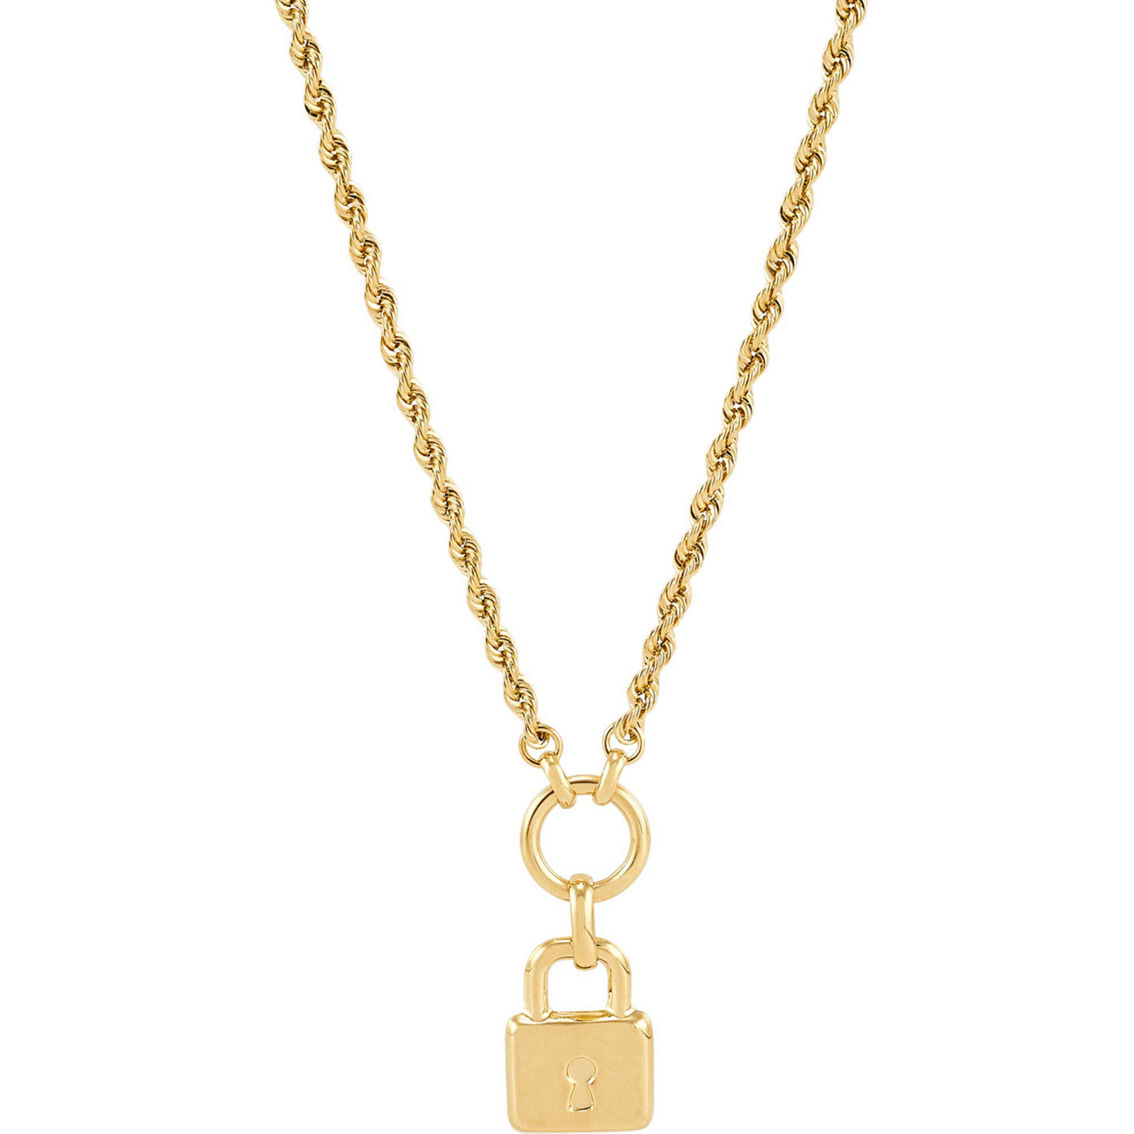 Samuel Aaron 14K Yellow Gold Lock with Key 16 in. Necklace - Image 1 of 4